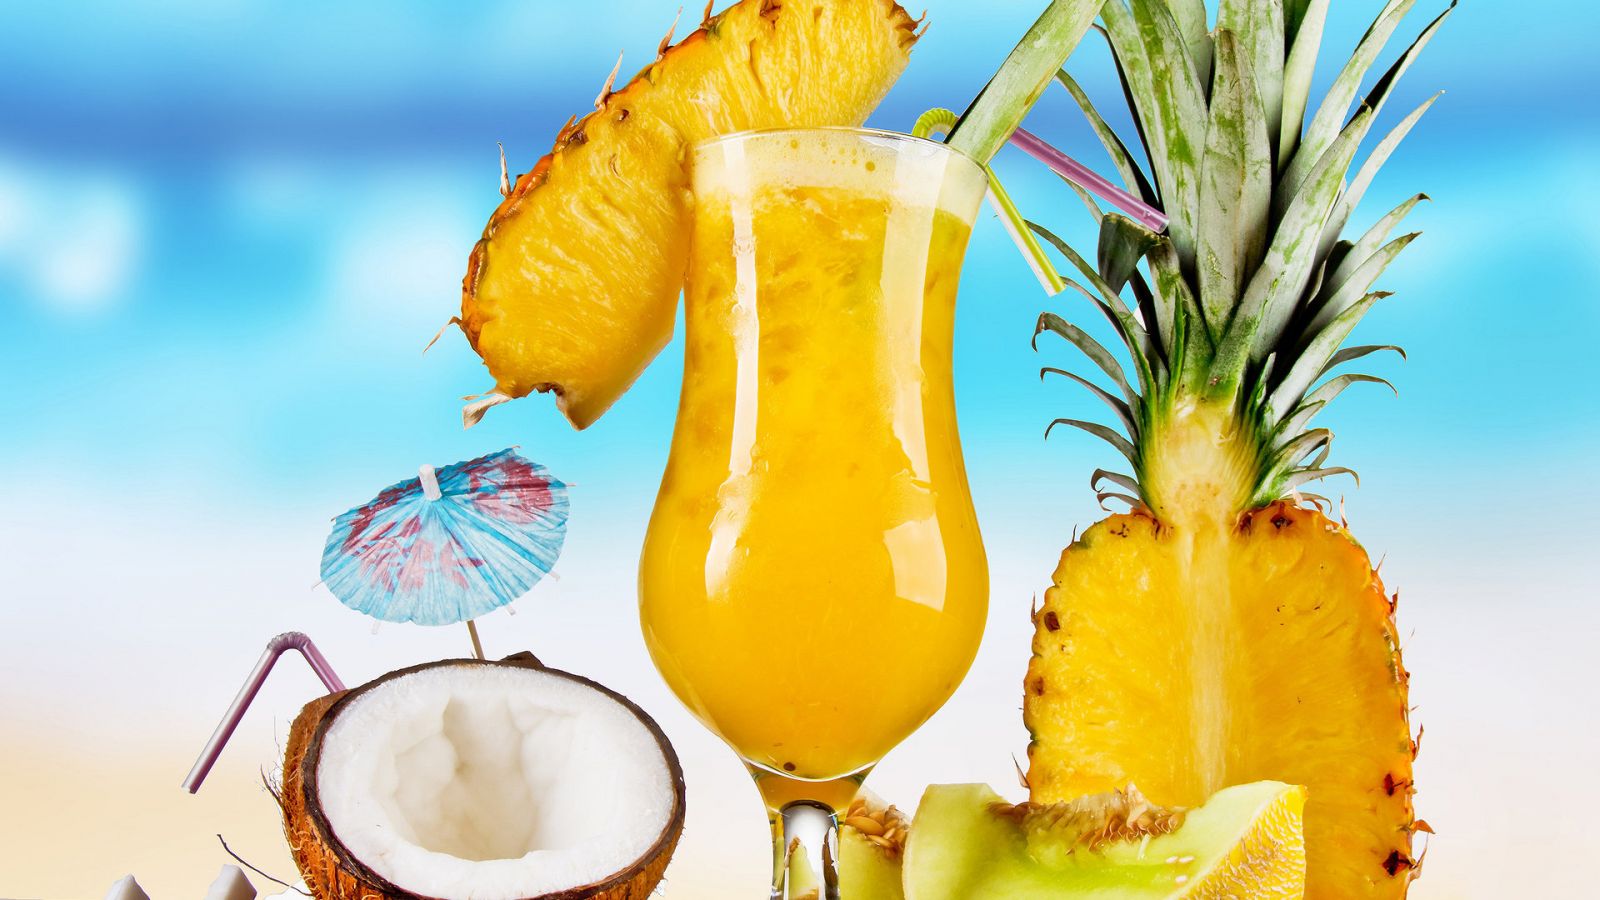 10 Easy Pineapple Cocktails by antioxidants | iFood.tv